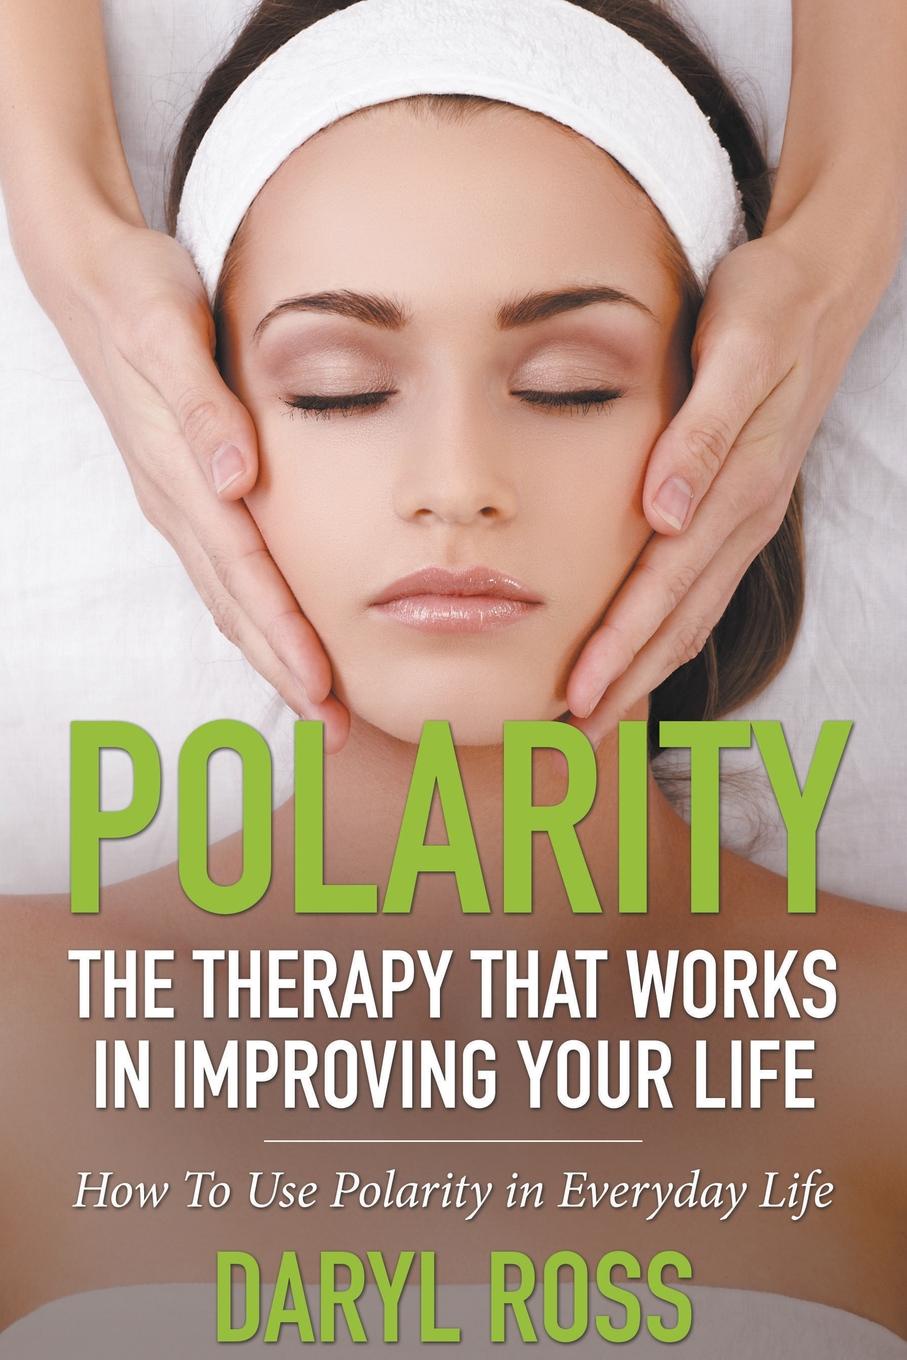 Daryl Ross Polarity. The Therapy That Works in Improving Your Life - How to Use Polarity in Everyday Life